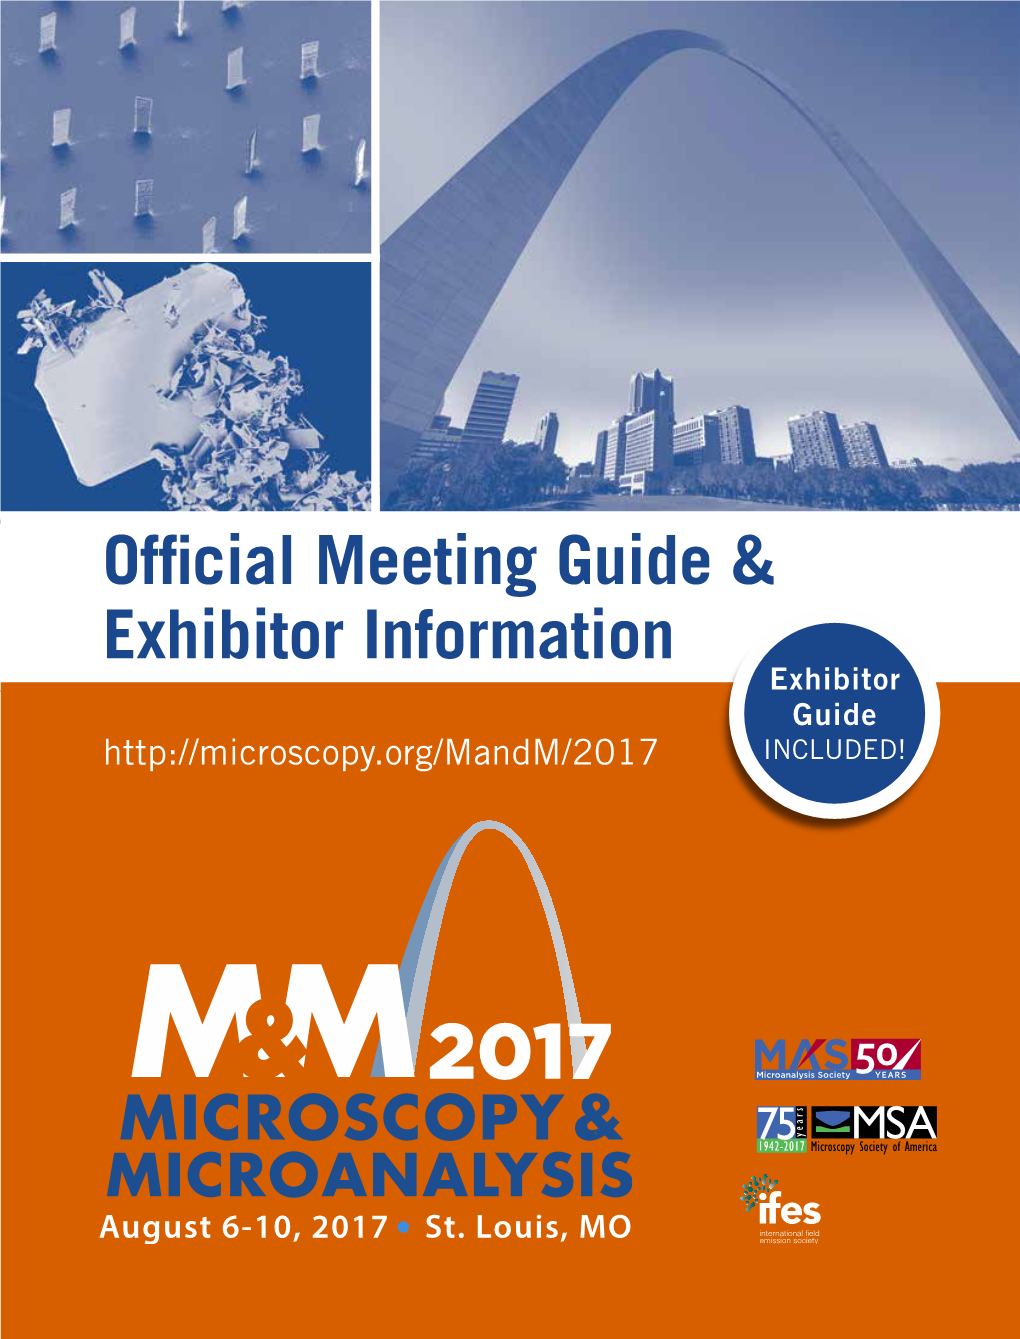 Official Meeting Guide & Exhibitor Information